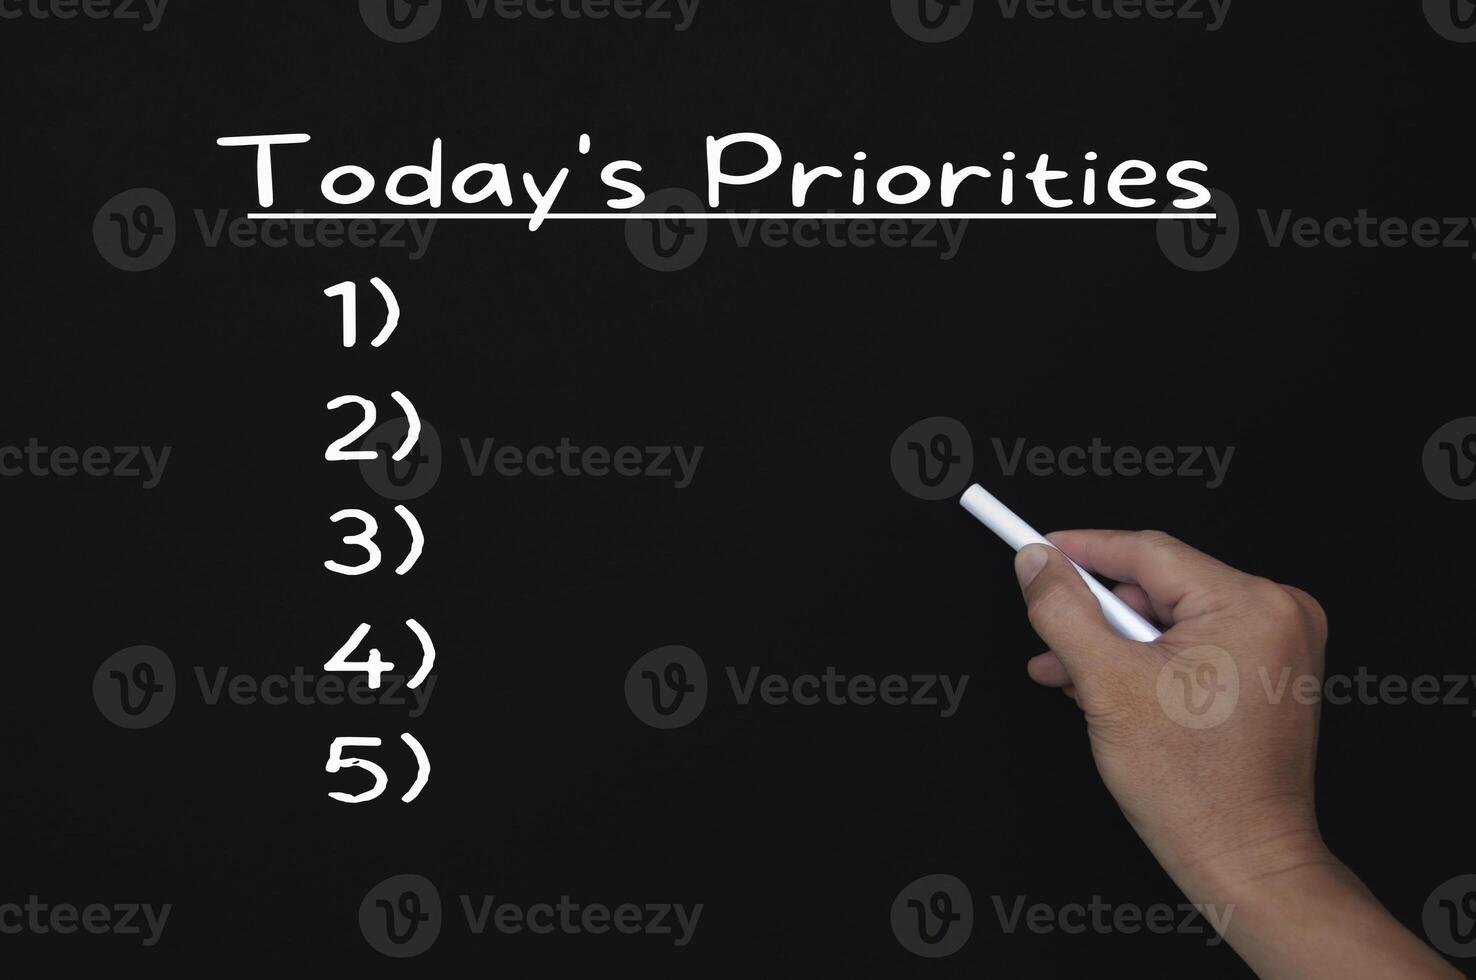 Today's priorities checklist on blackboard. Business and prioritization concept. photo